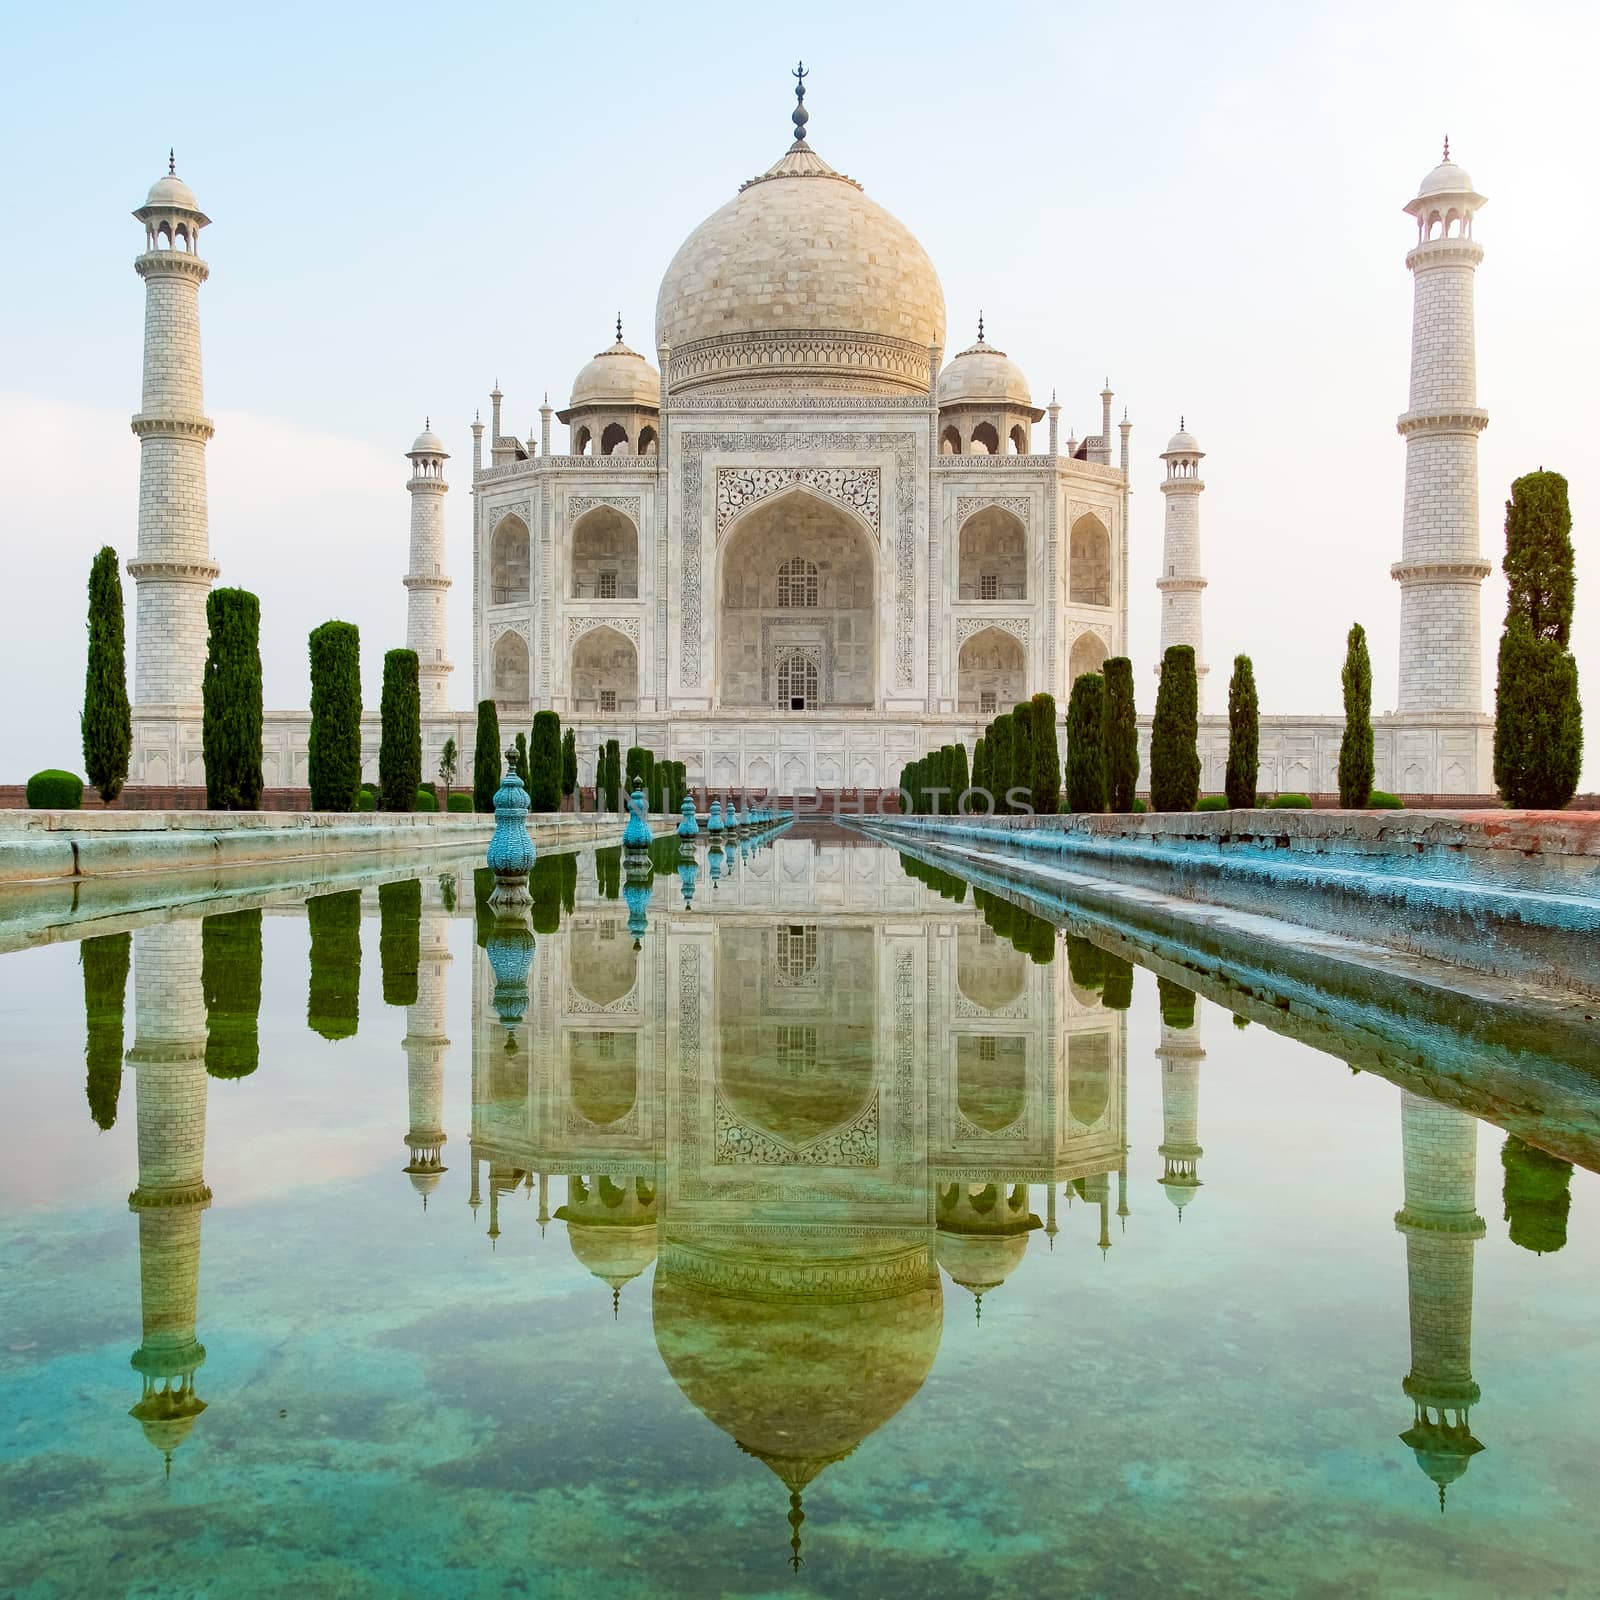 Taj Mahal front view reflected on the reflection pool. by Tanarch